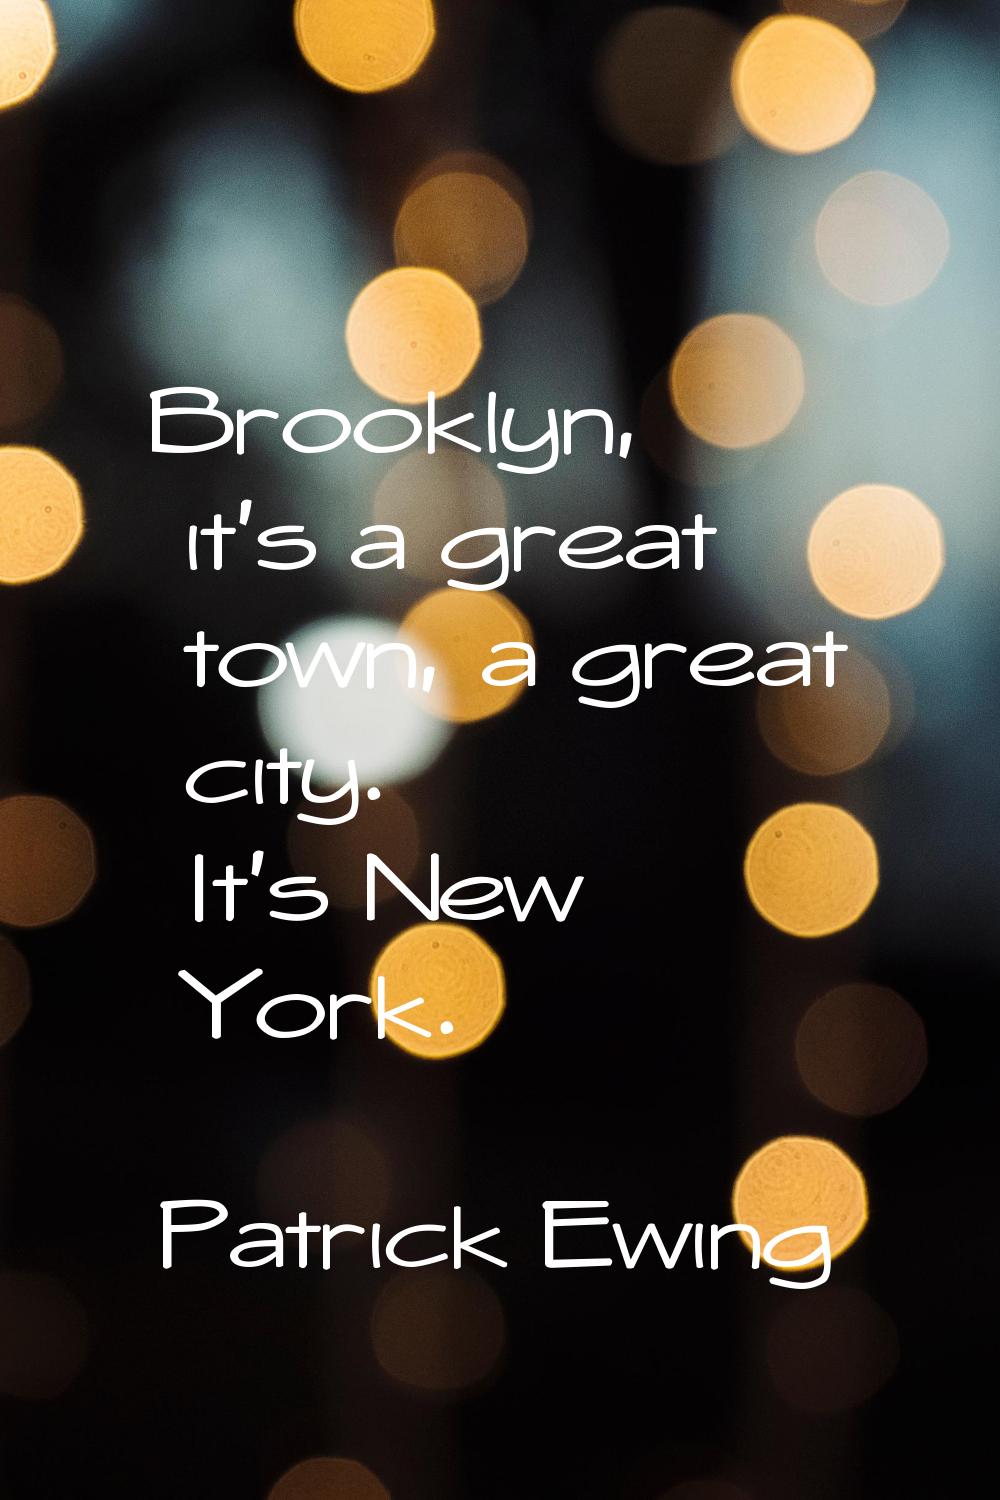 Brooklyn, it's a great town, a great city. It's New York.